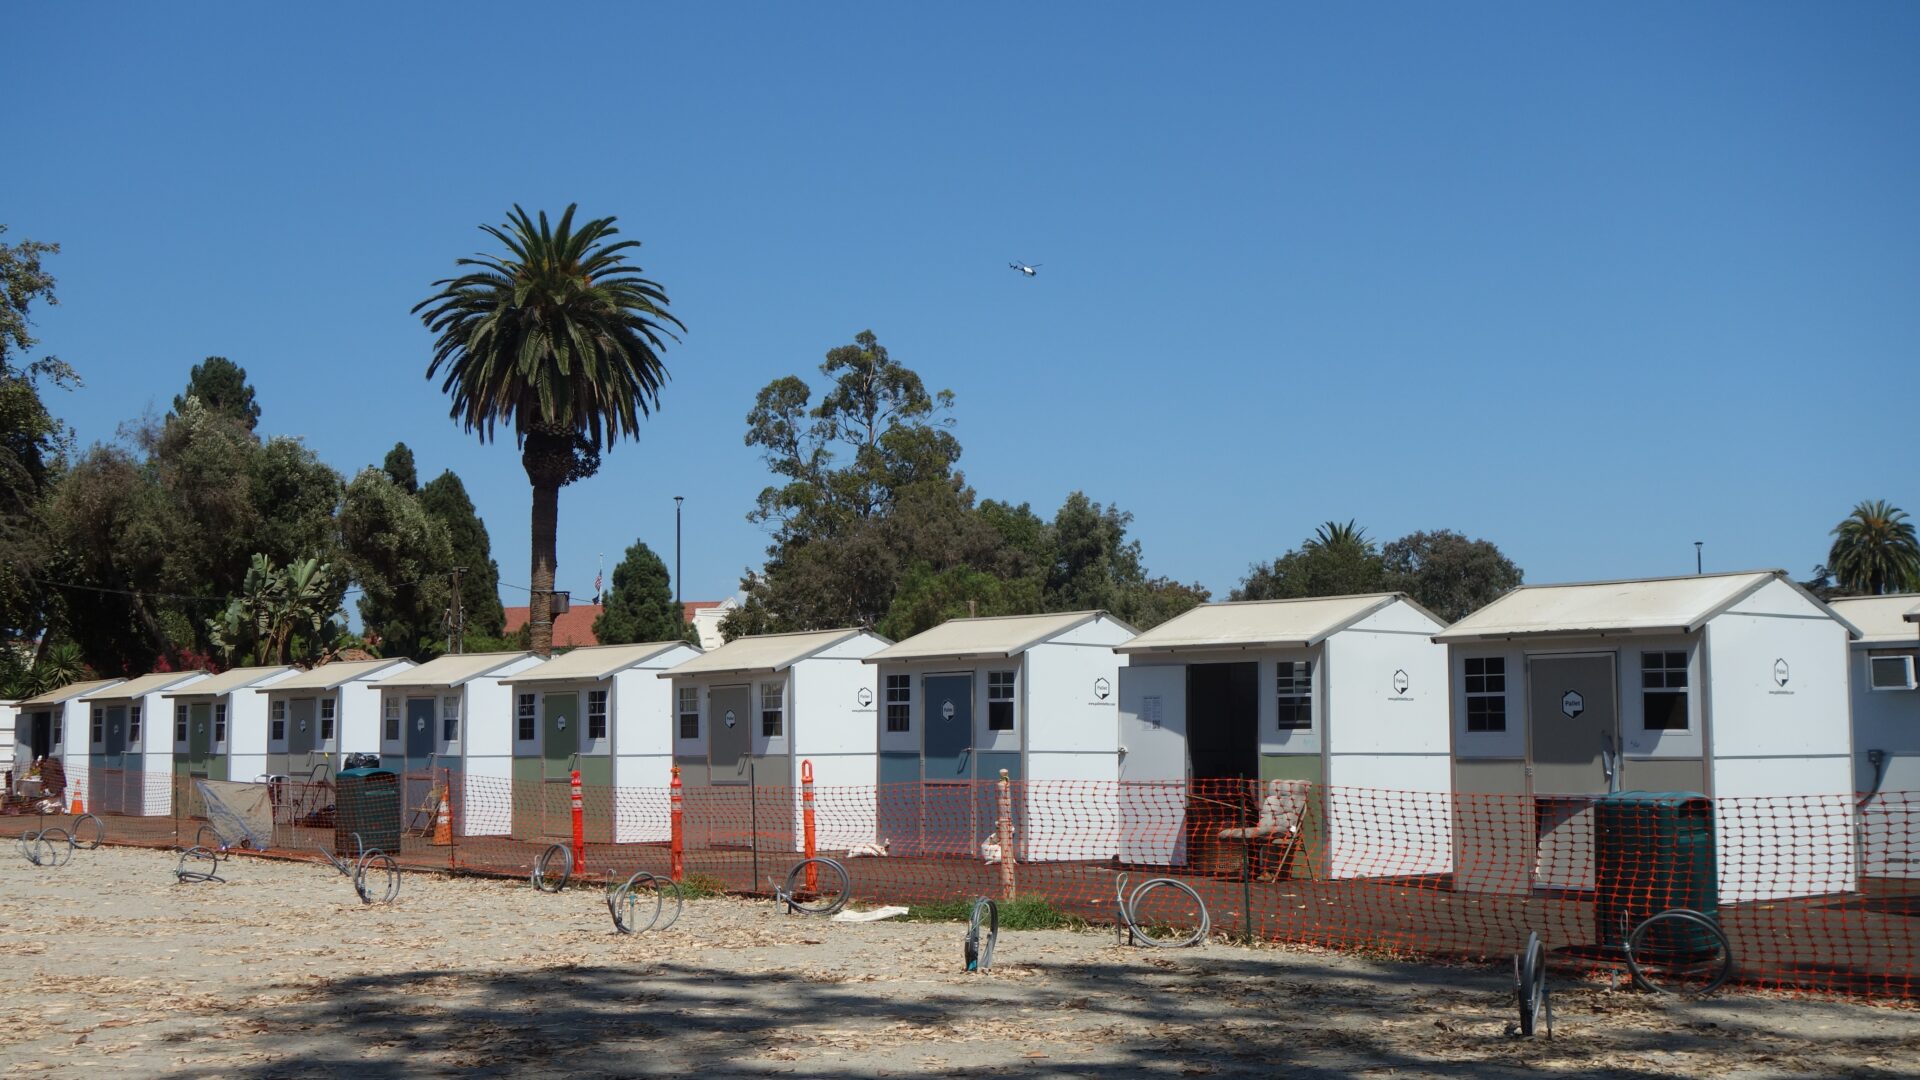 Tiny Homes in a row on the West LA VA Campus. Construction cones and a fence are in front of them.